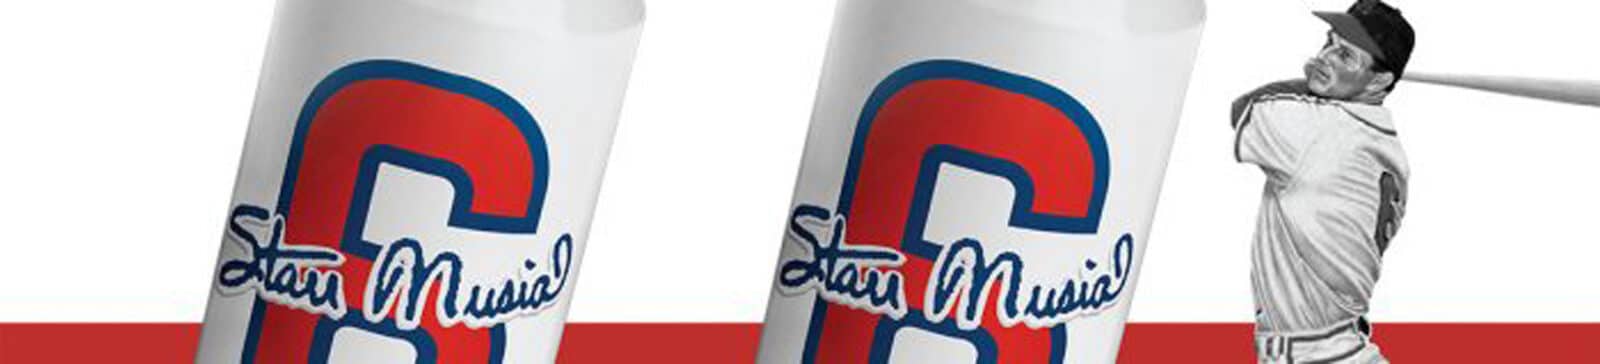 #6 Stan Musial Classic American Lager